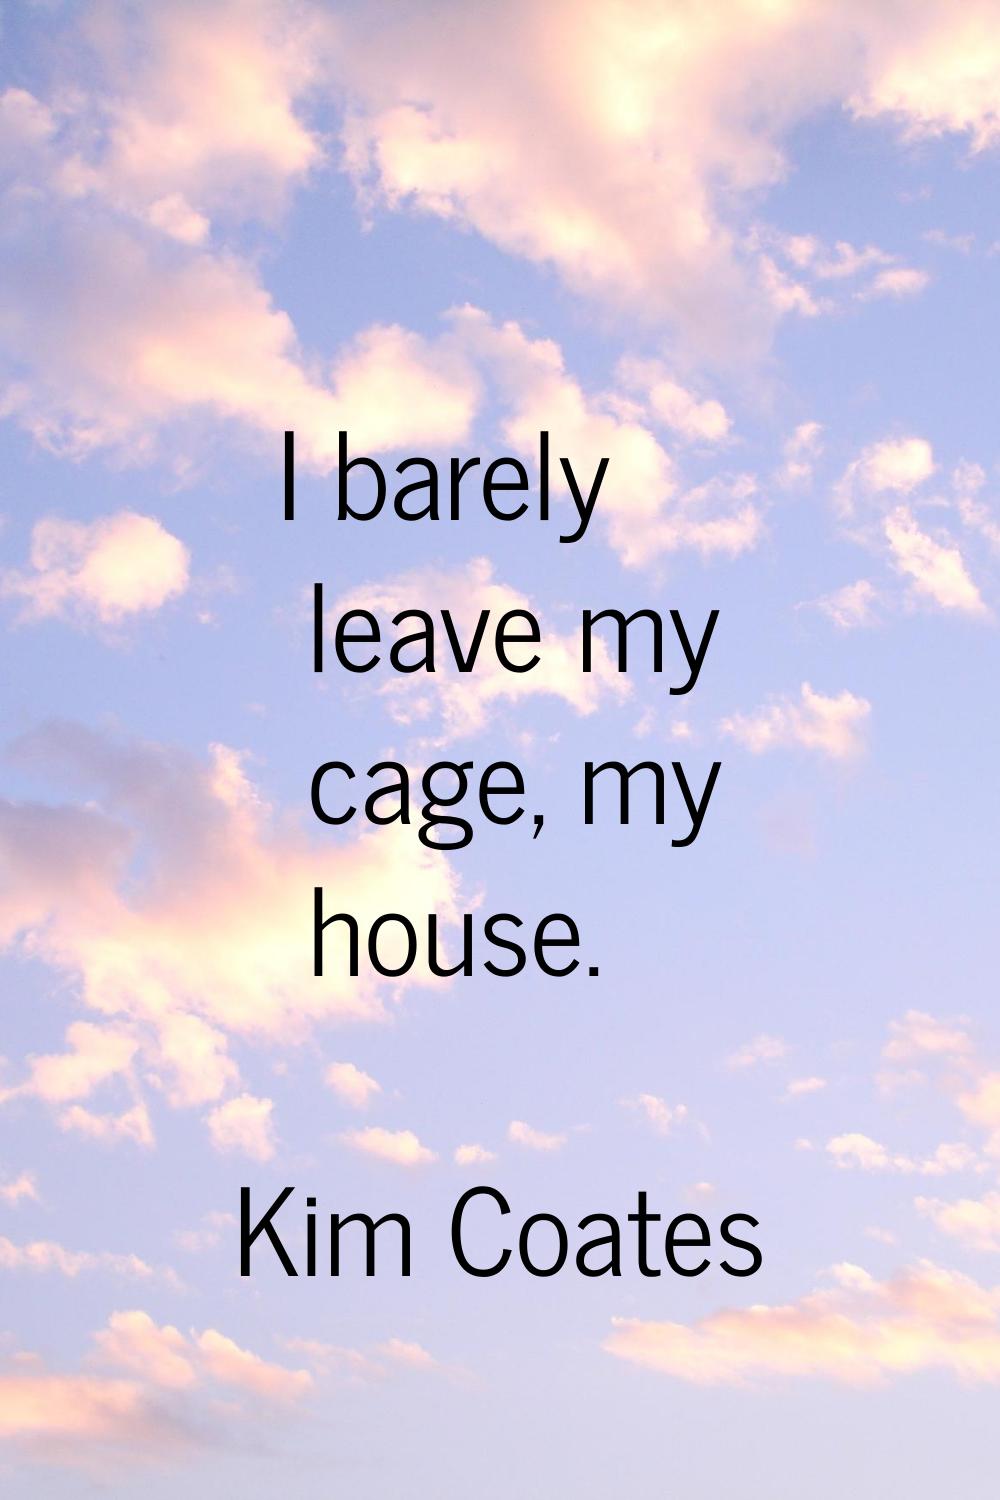 I barely leave my cage, my house.